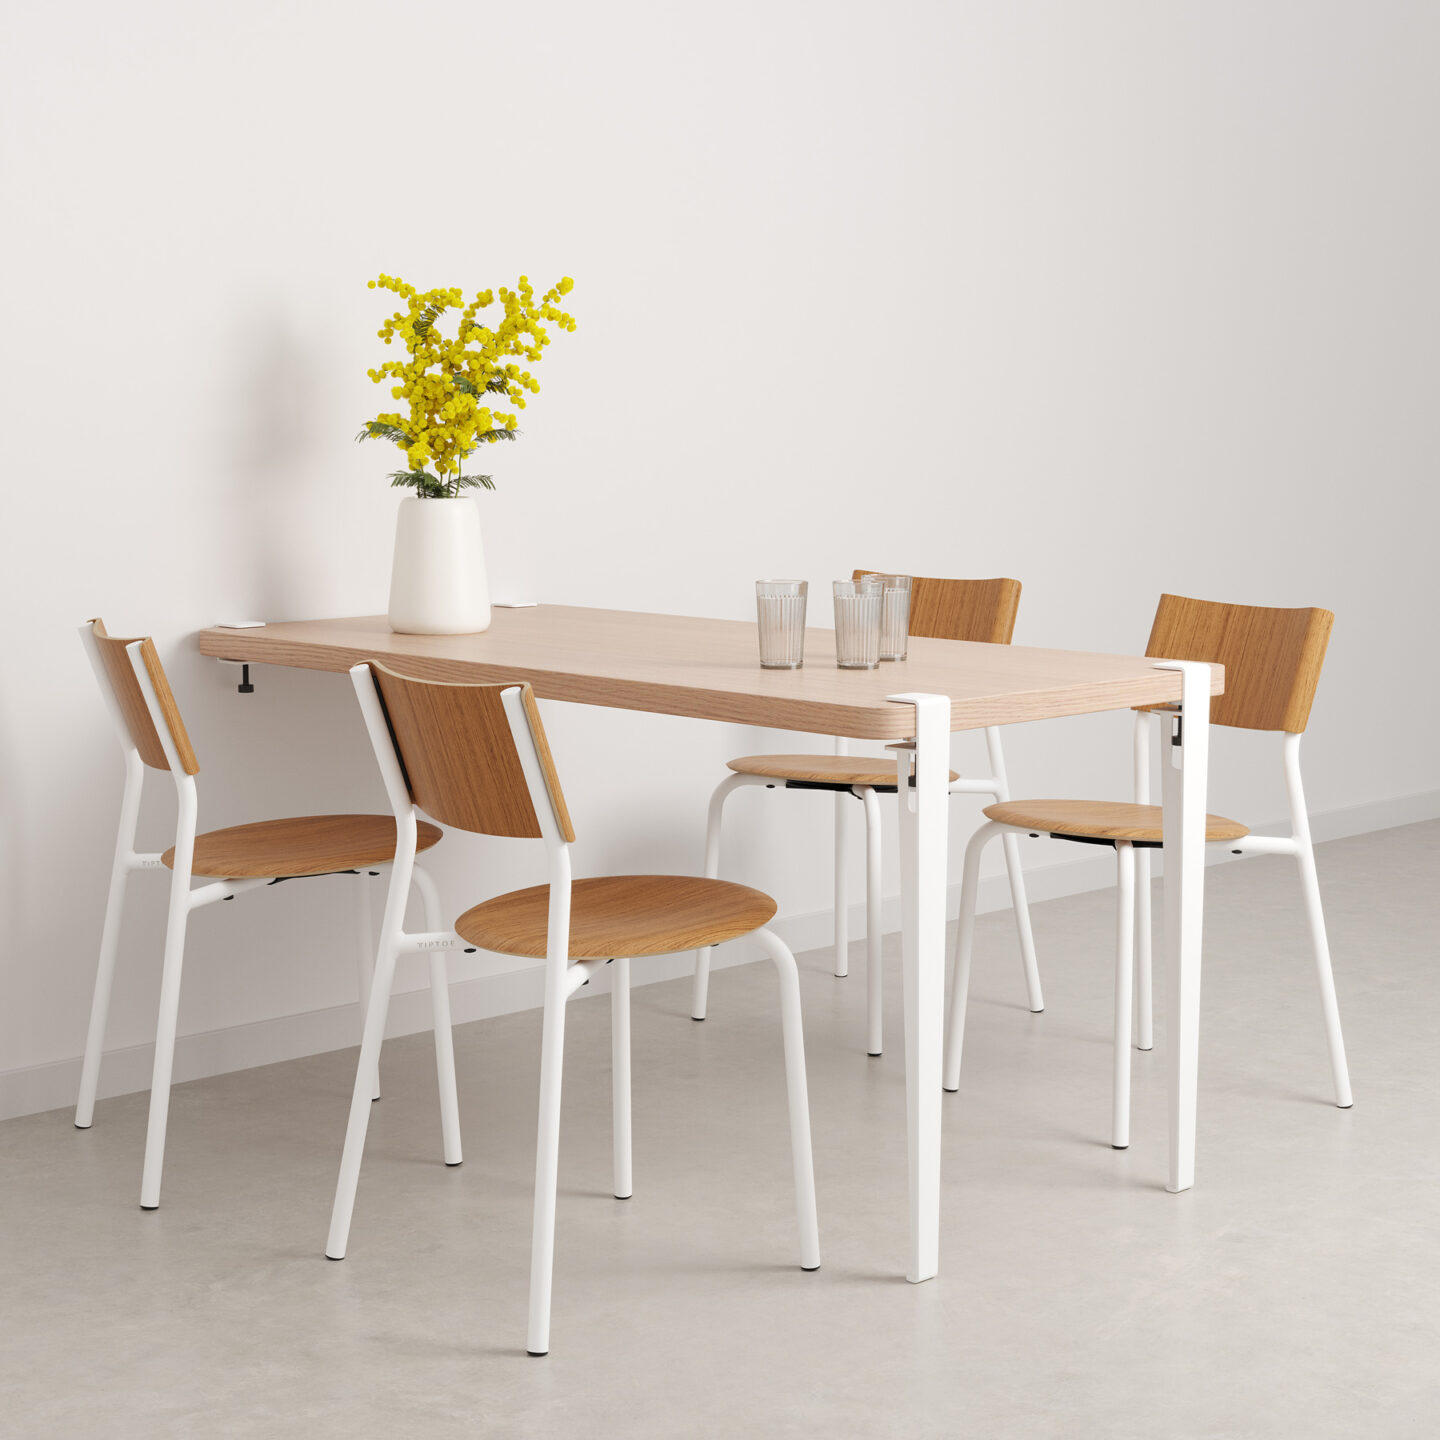 Wall-mounted dining table - Sustainable design - 100% made in Europe